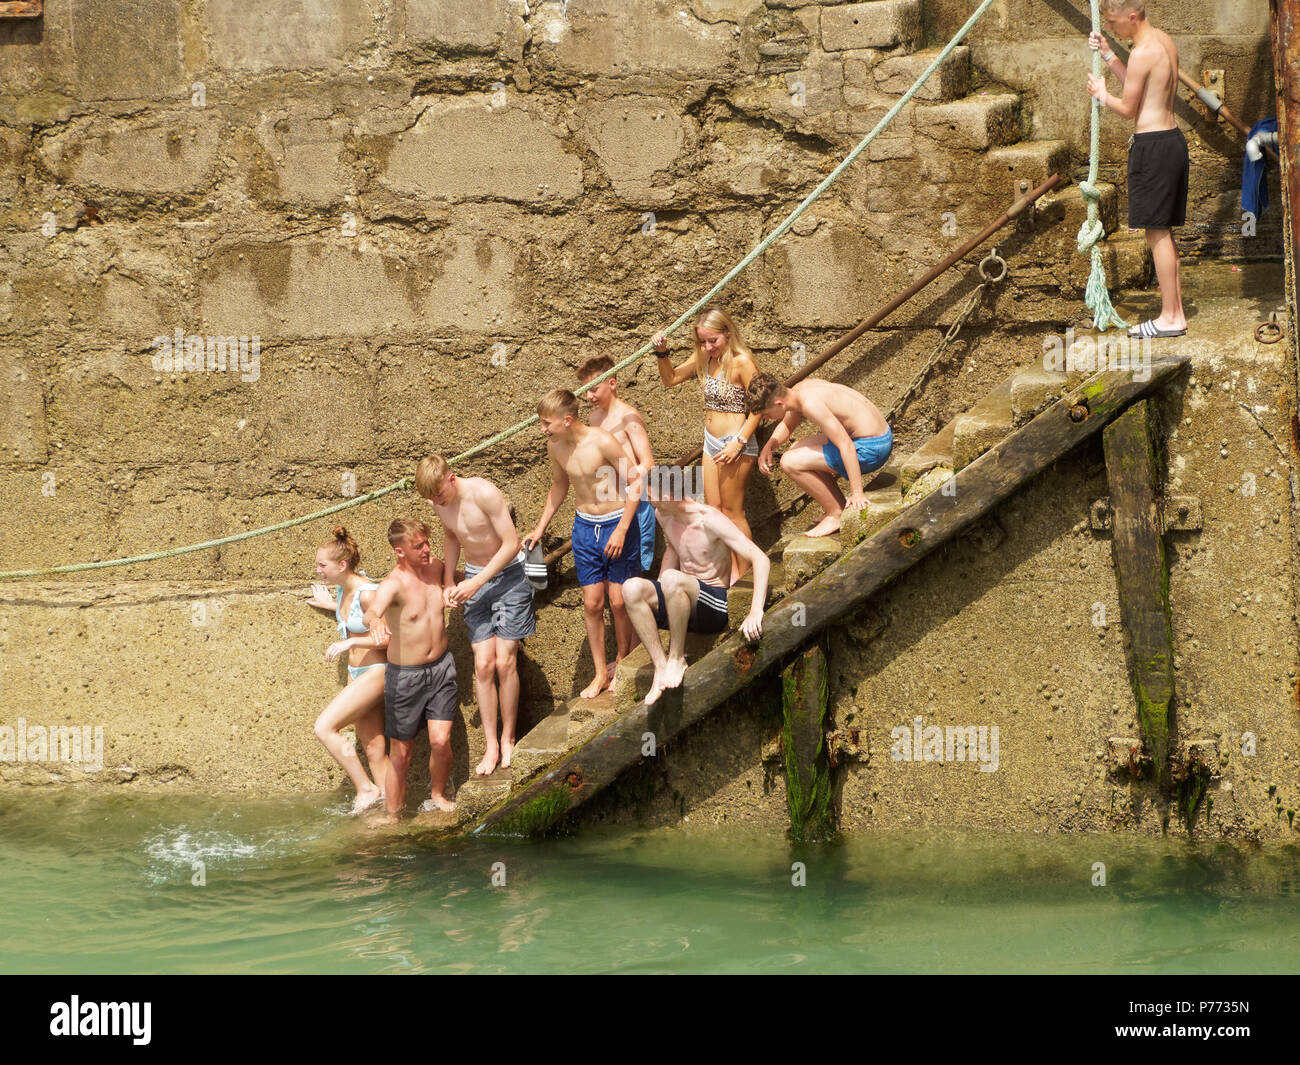 Fun canoeing in Newquay harbour. 2018  Robert Taylor/Alamy Live News.  Newquay, Cornwall, UK. Stock Photo